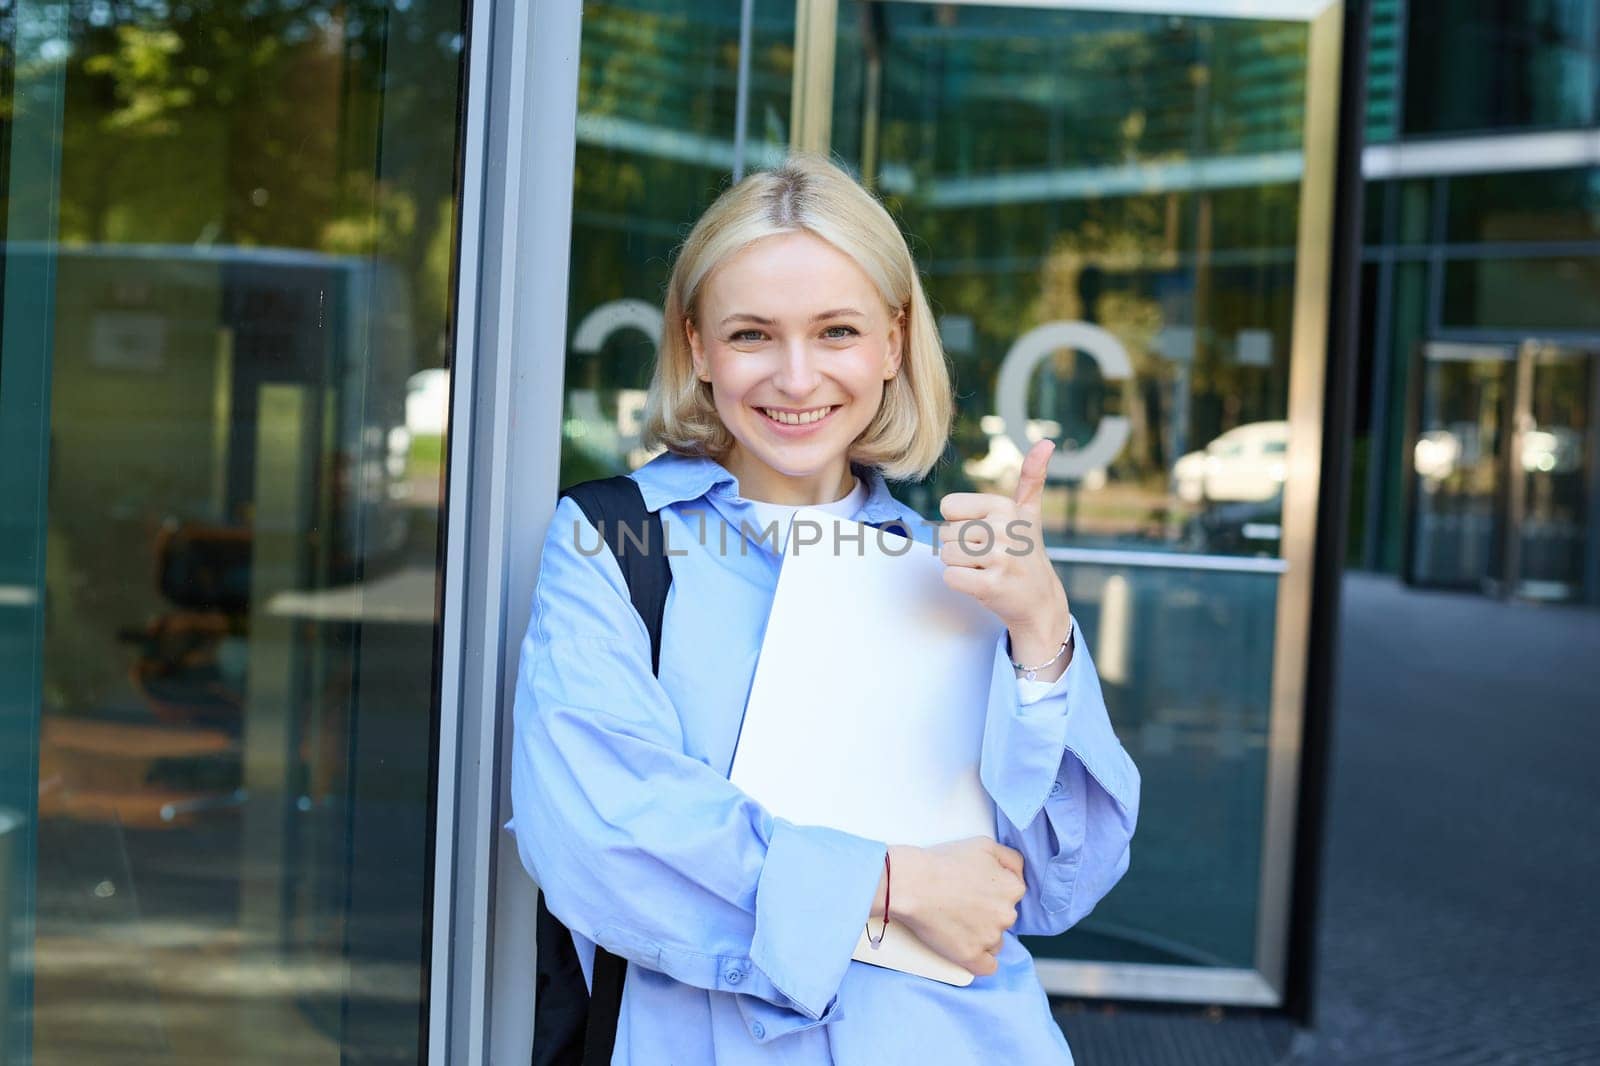 Image of young college girl, young woman with laptop, posing near university building, standing on street, smiling, concept of education and people.